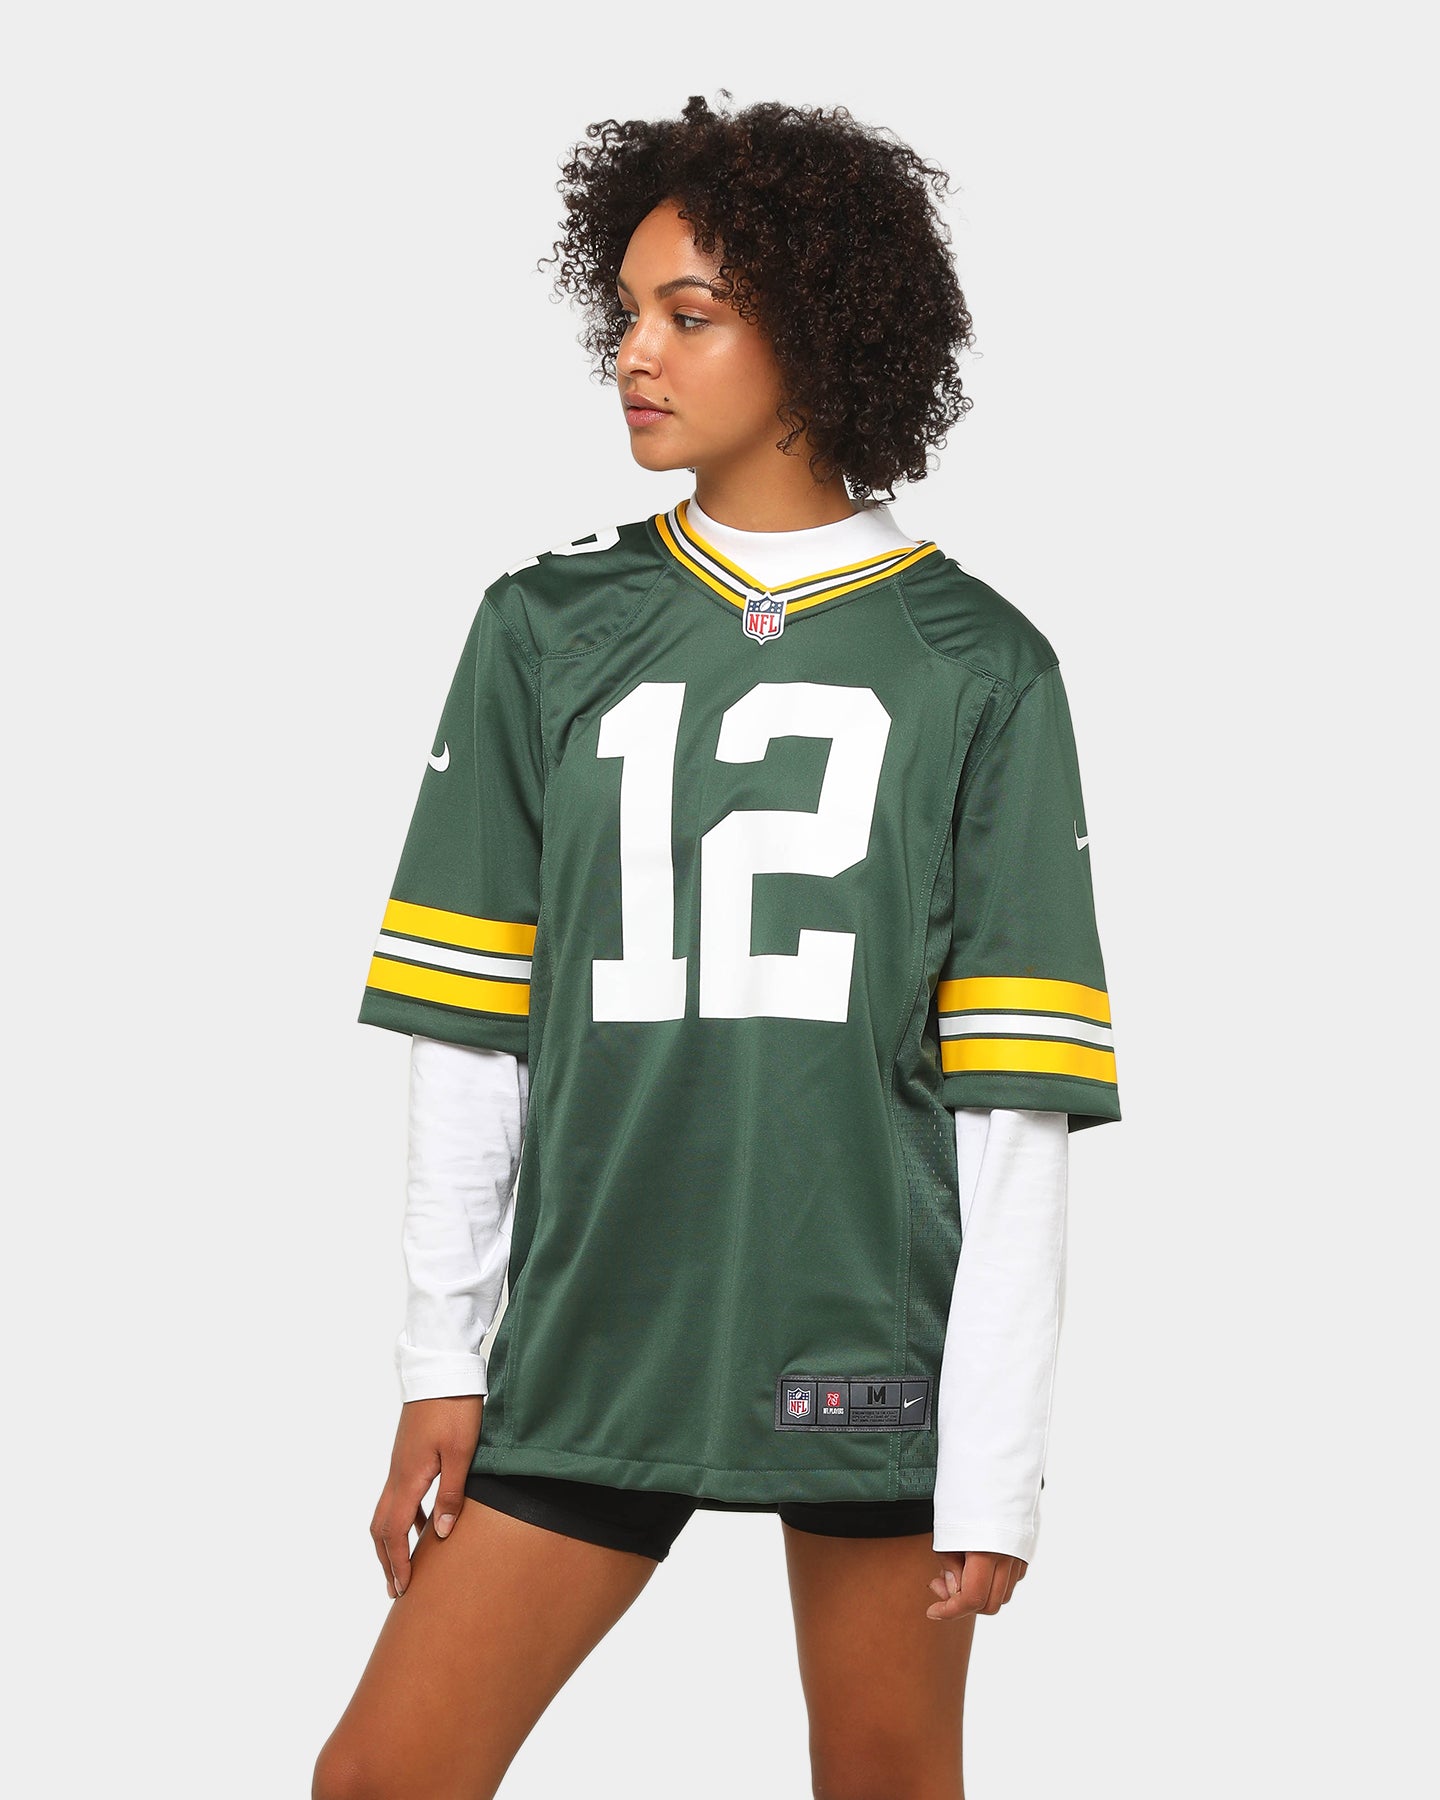 discount green bay packers gear